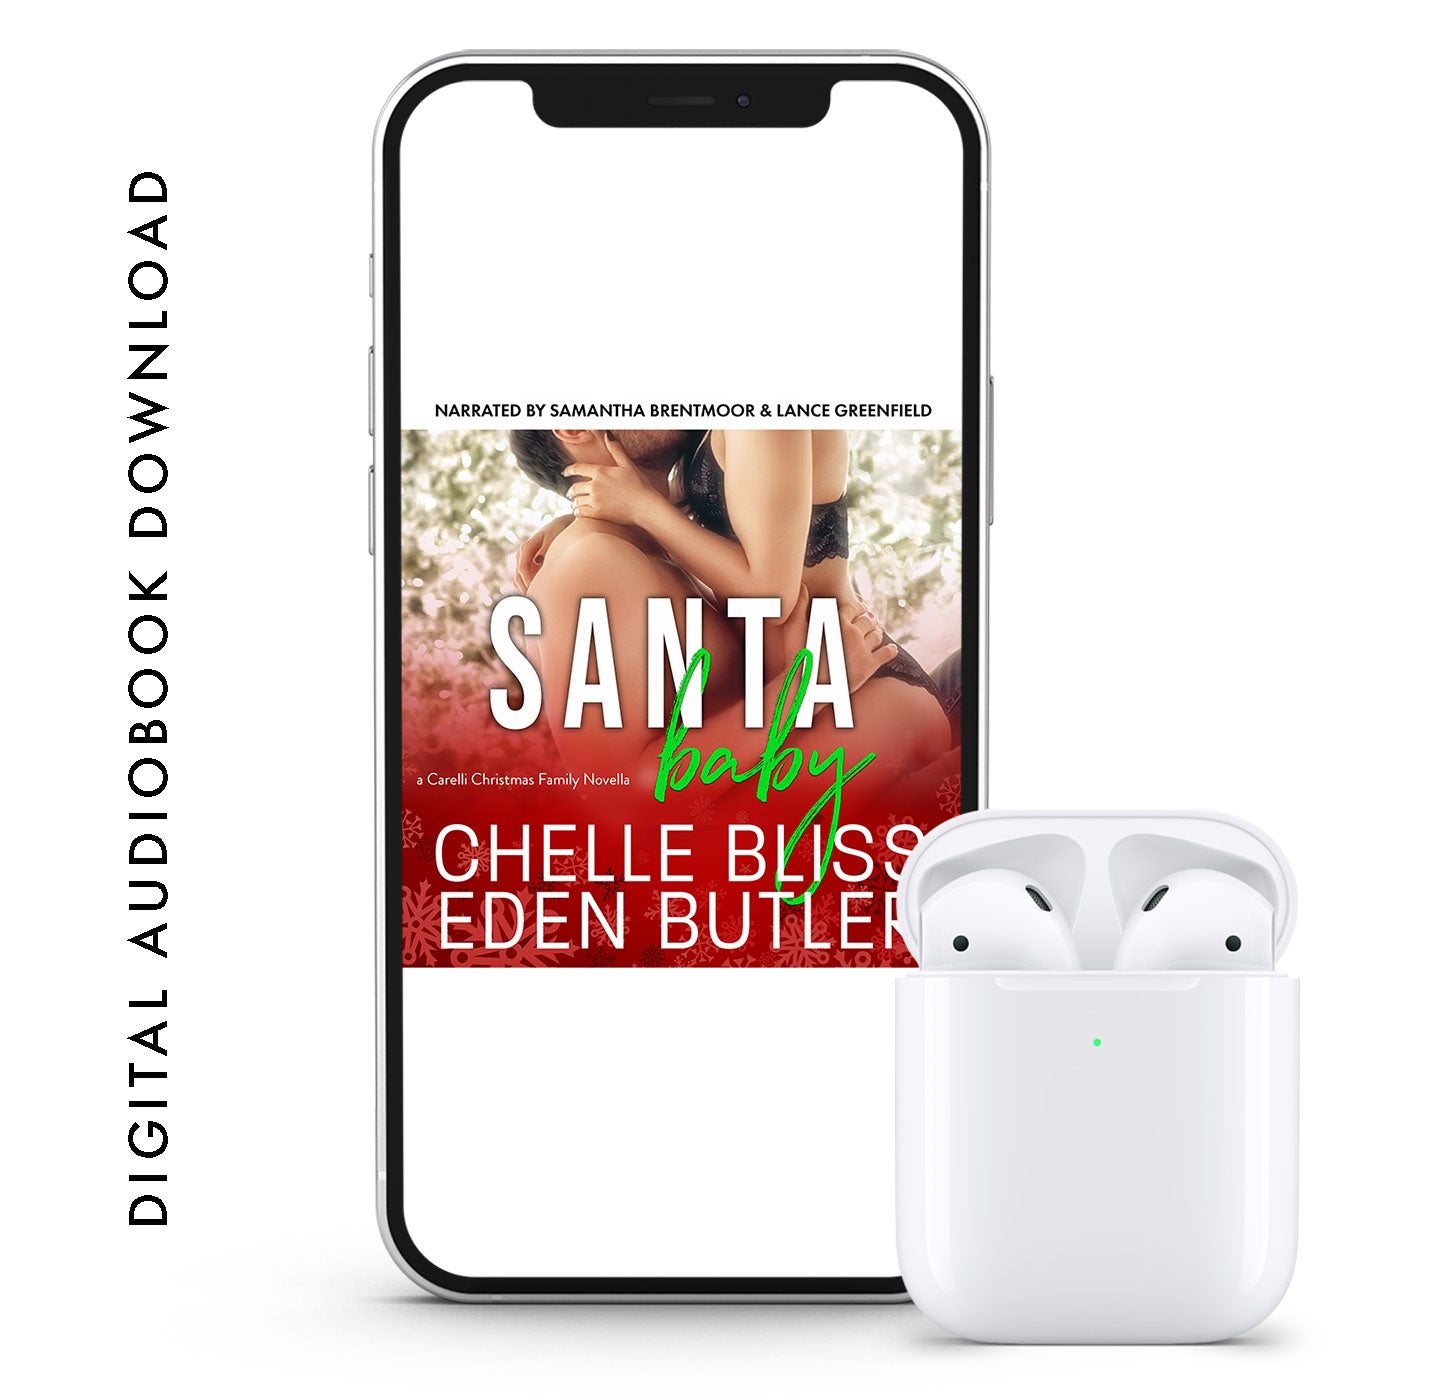 santa baby audiobook by chelle bliss and eden butler couple embracing 